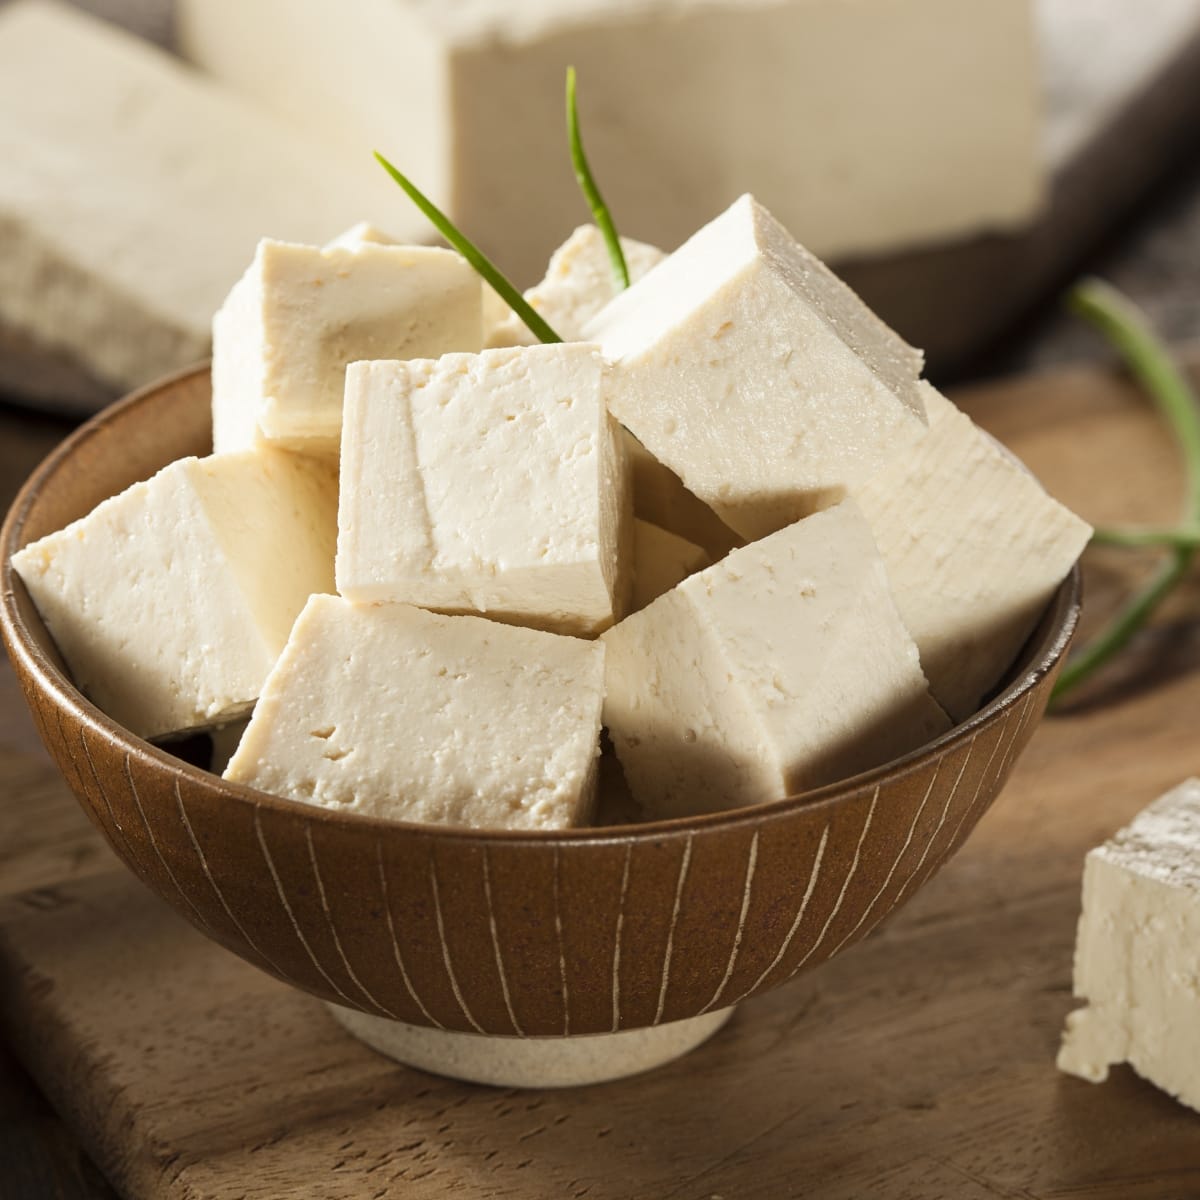 Chunks of Tofu in a Ceramic Bowl on a Wooden Table